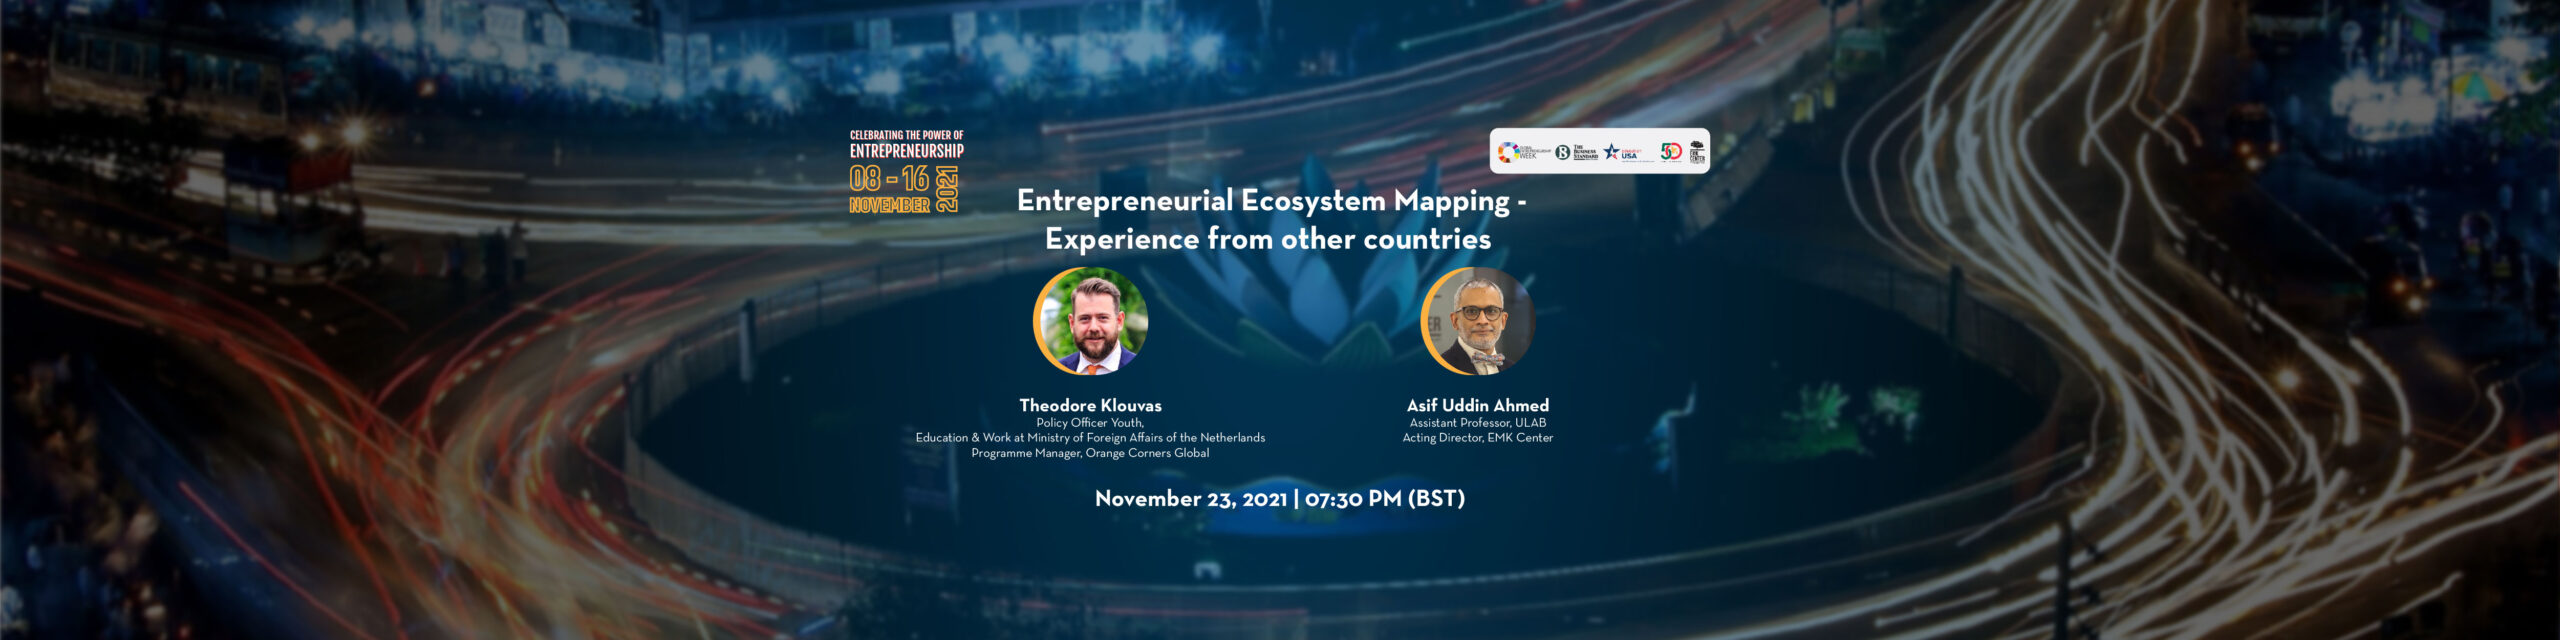 Entrepreneurial Ecosystem Mapping – Experience from other countries